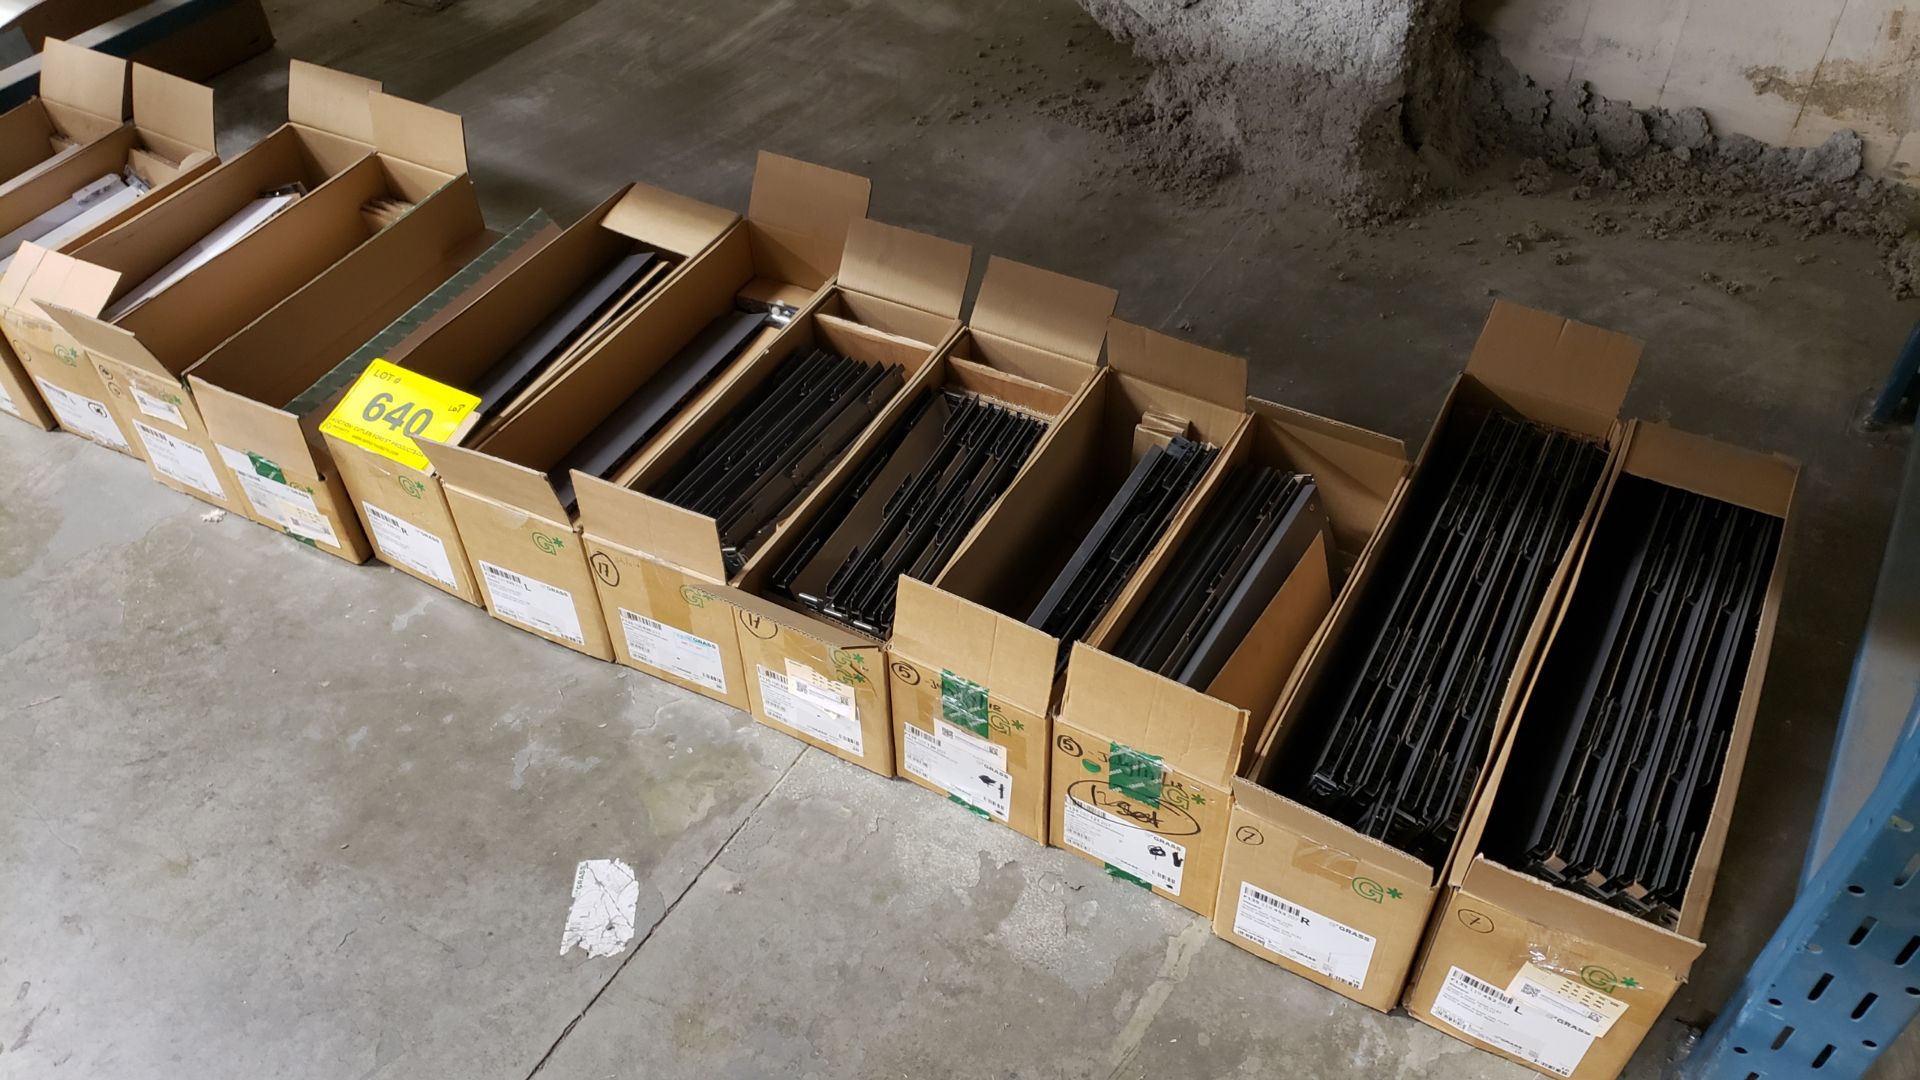 LOT BOXES OF GRASS VIONARO STEEL DRAWER SIDE H89 NL450, GRAPHITE, RIGHT AND LEFT PU20, 12 BOXES OF - Image 7 of 7